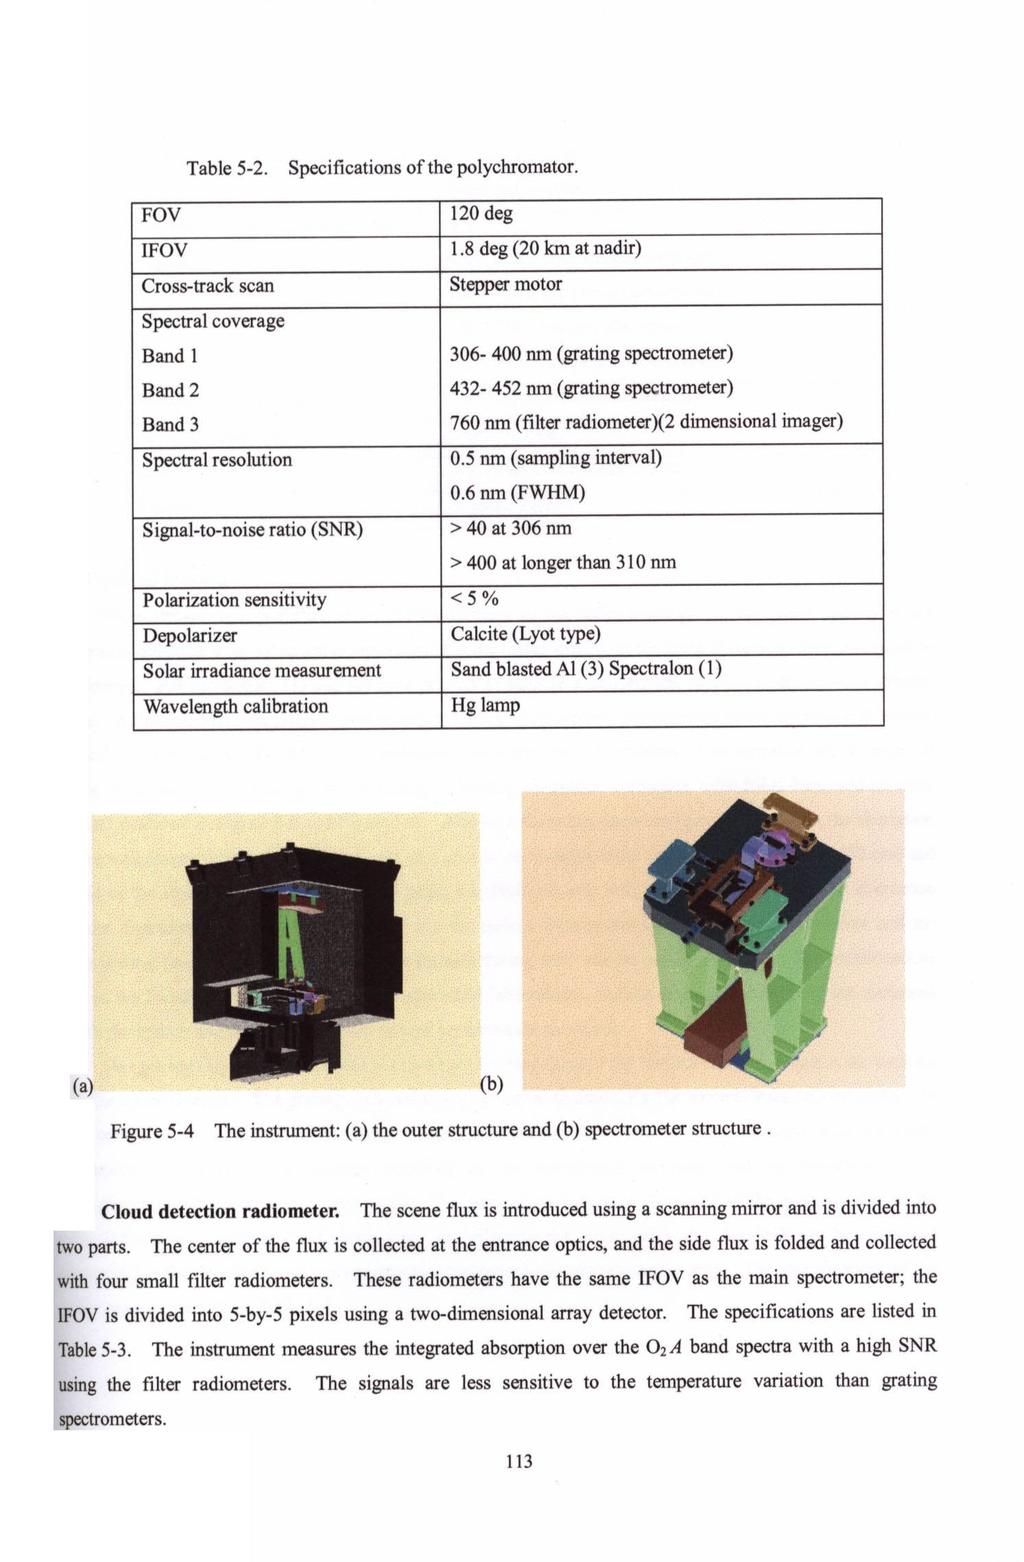 Table 5-2. Specifications of the polychromator. Figure 5-4 The instrument:(a) the outer structure and (b) spectrometer structure. Cloud detection radiometer.